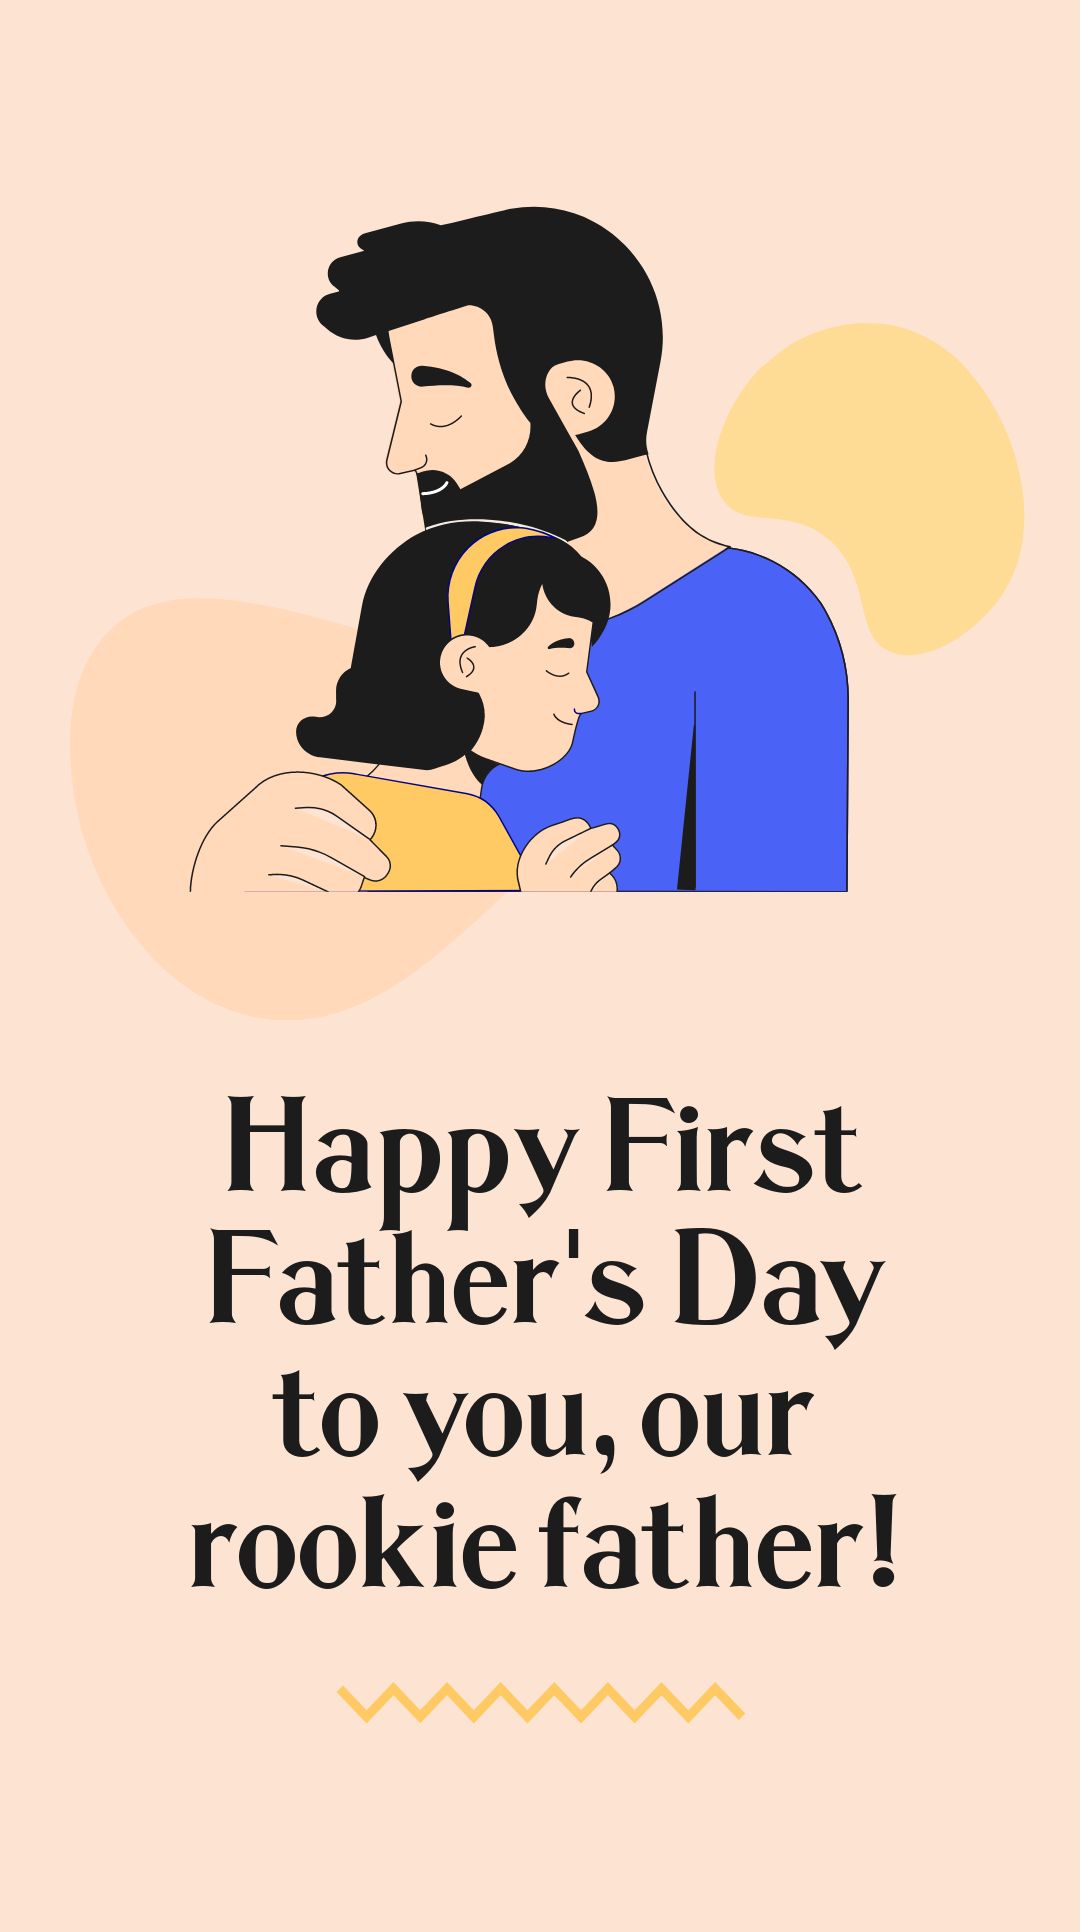 First Father's Day Whatsapp Status Template